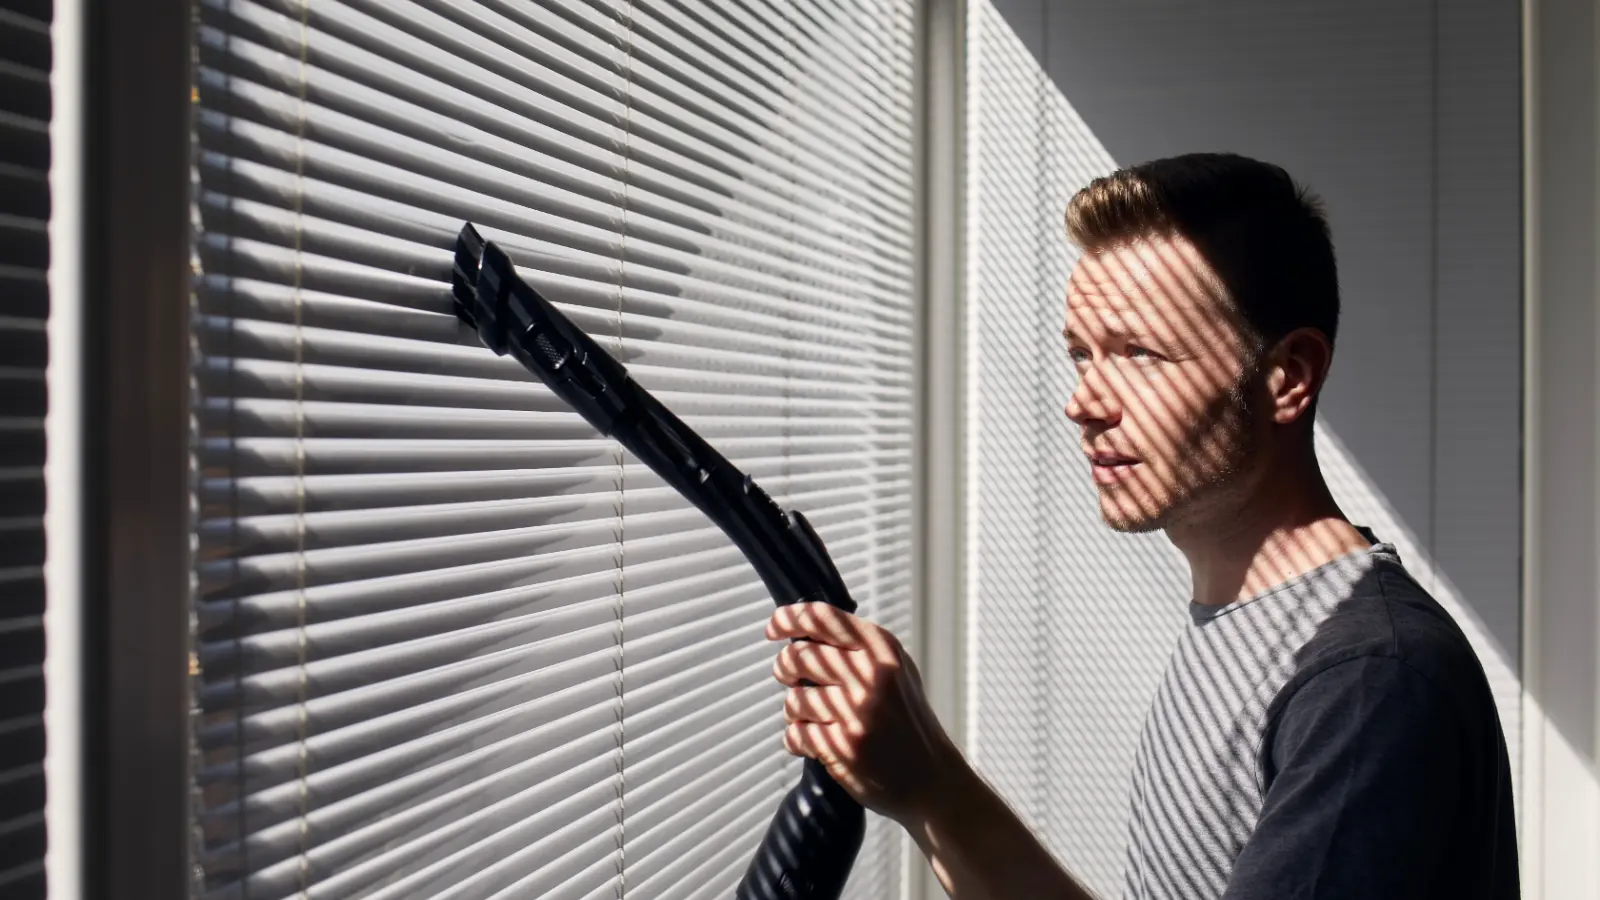 A man cleaning blinds with a vacuum cleaner.